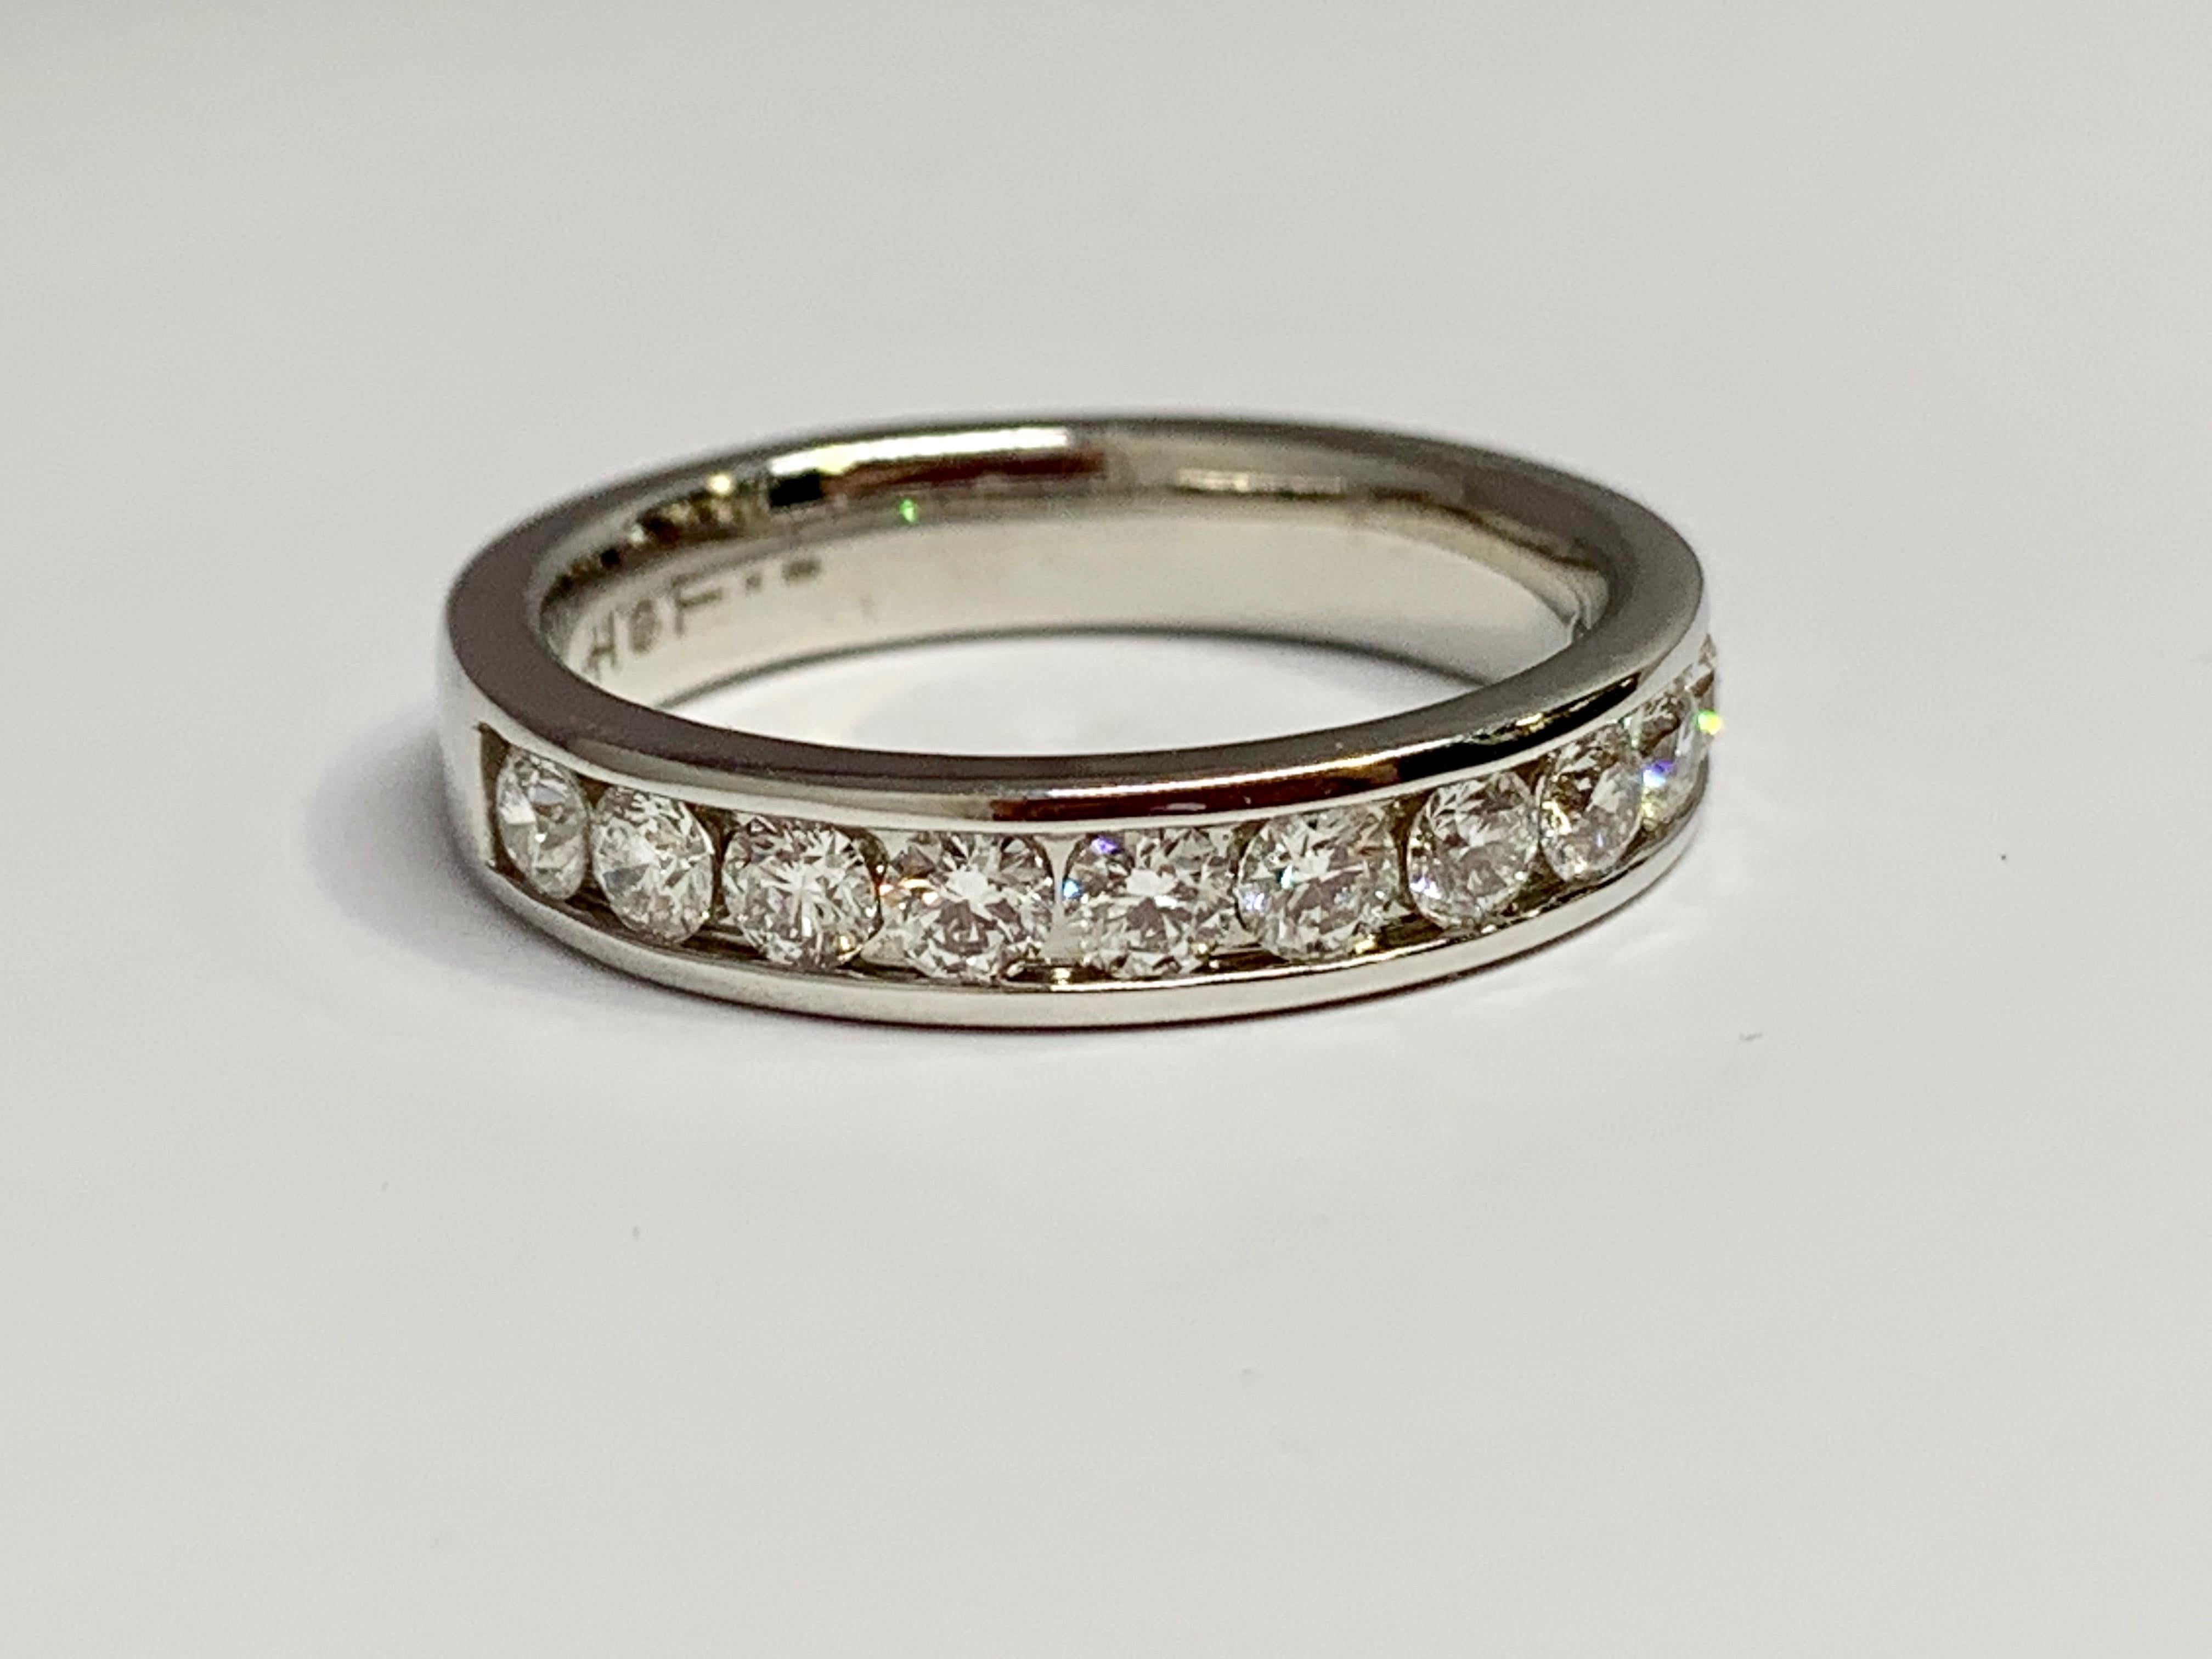 This Hearts On Fire channel-set diamond wedding band has a total carat weight of 0.94 carats. Hearts On Fire diamonds are the world's most perfectly cut diamonds, allowing for maximum light return and brilliance. The ring is 4.5mm wide and holds 11